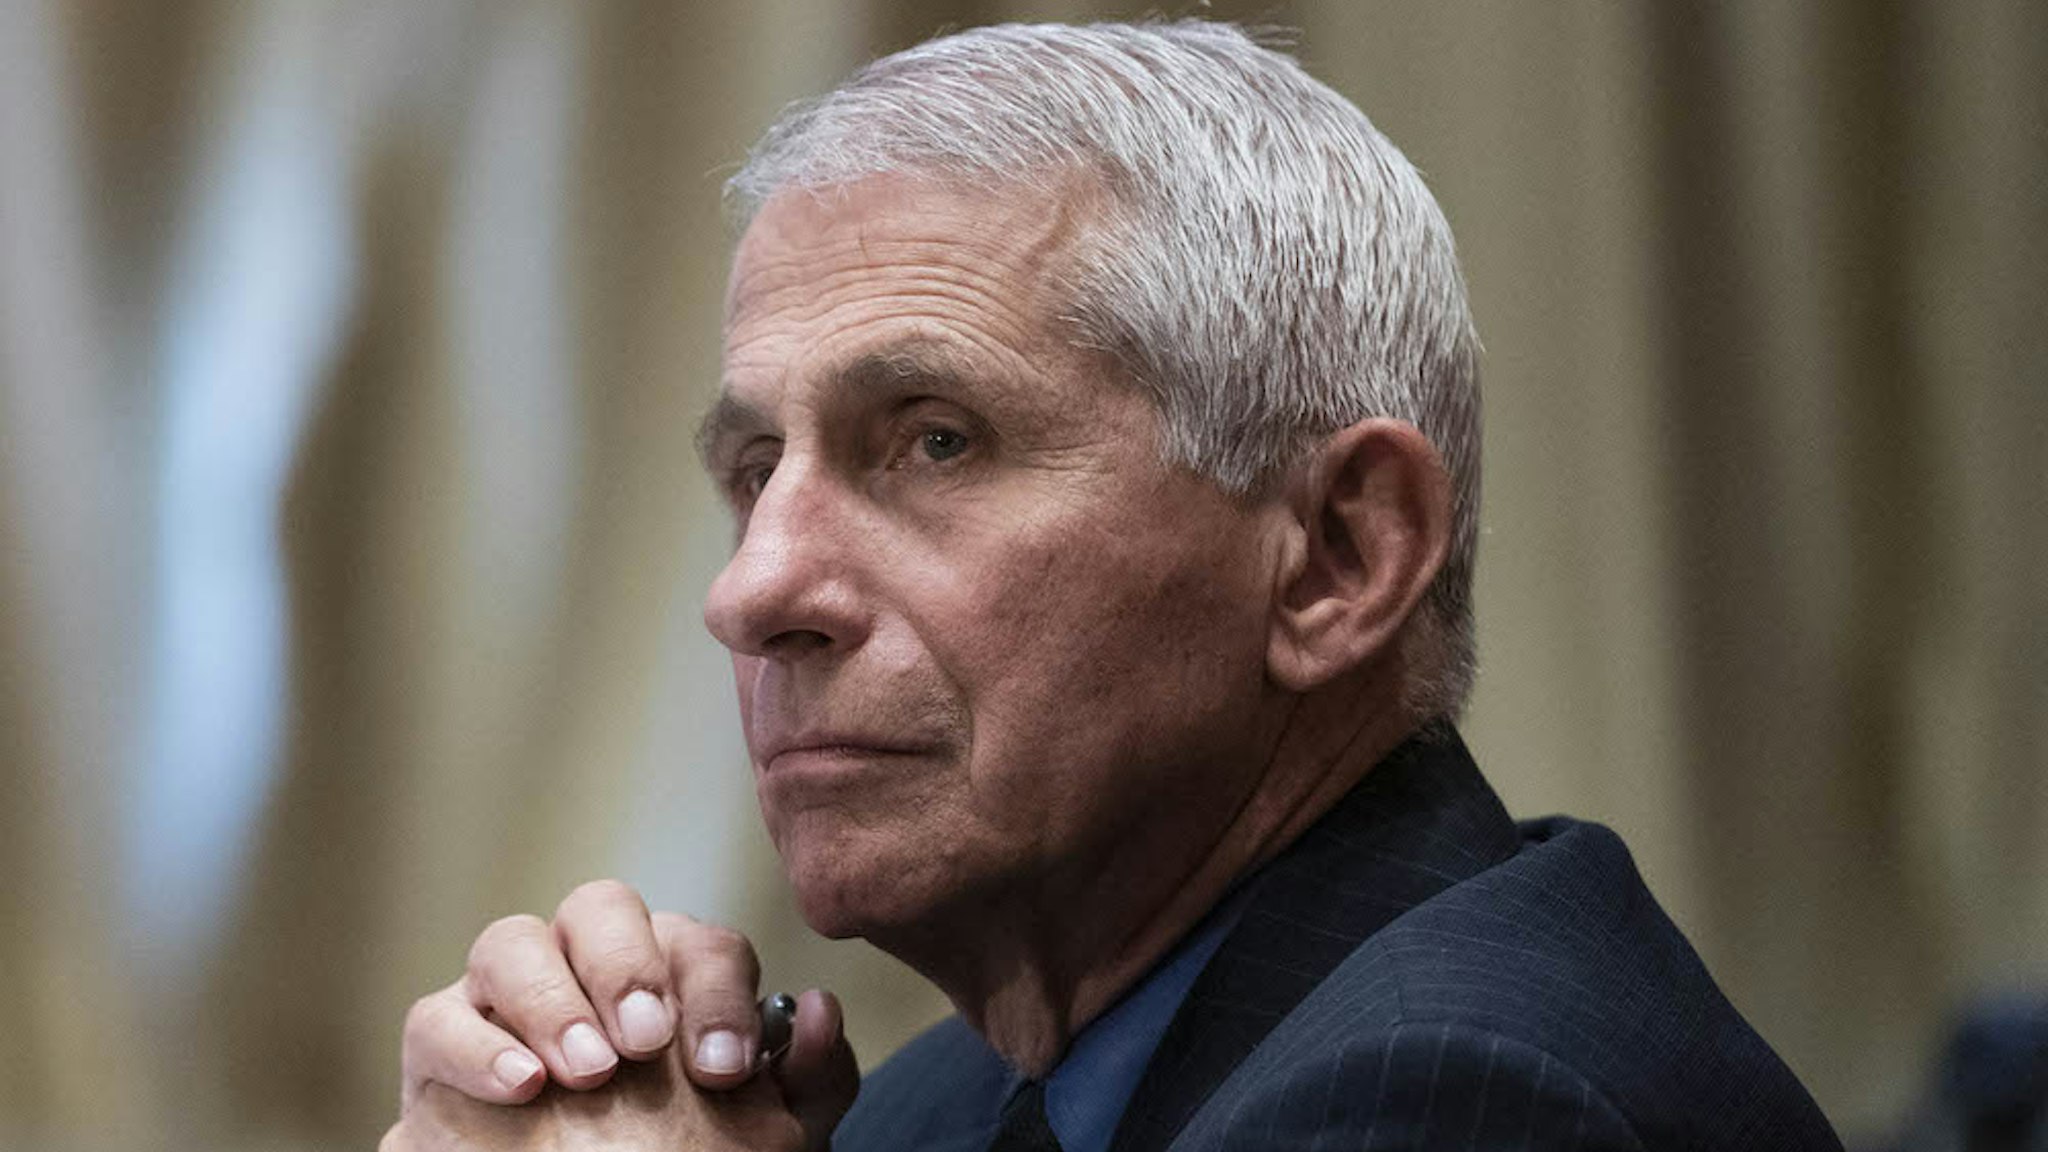 Anthony Fauci, director of the National Institute of Allergy and Infectious Diseases, listens during a Senate Appropriations Subcommittee hearing in Washington, D.C., U.S., on Wednesday, May 26, 2021. The hearing is titled "National Institutes of Health's FY22 Budget and the State of Medical Research." Photographer: Sarah Silbiger/UPI/Bloomberg